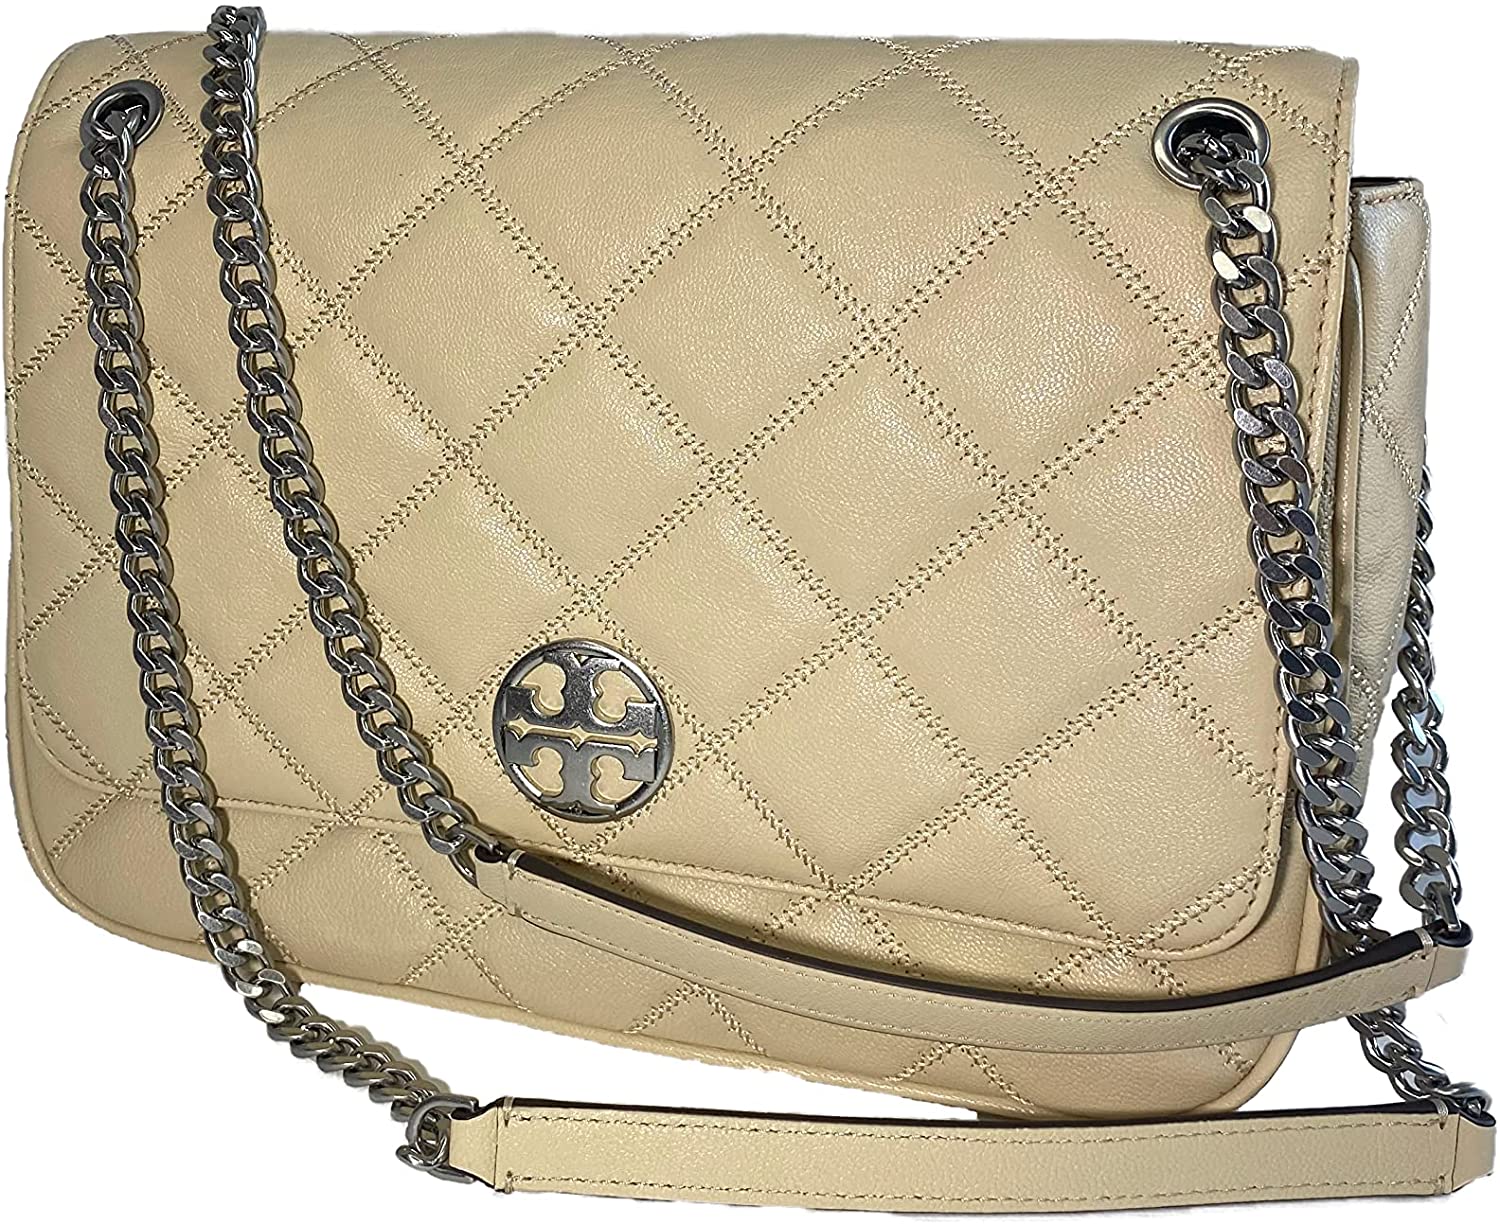 Tory Burch Willa Shoulder Bag New Cream One Size Quilted Leather  Convertible Chain Strap - Beyond Joy